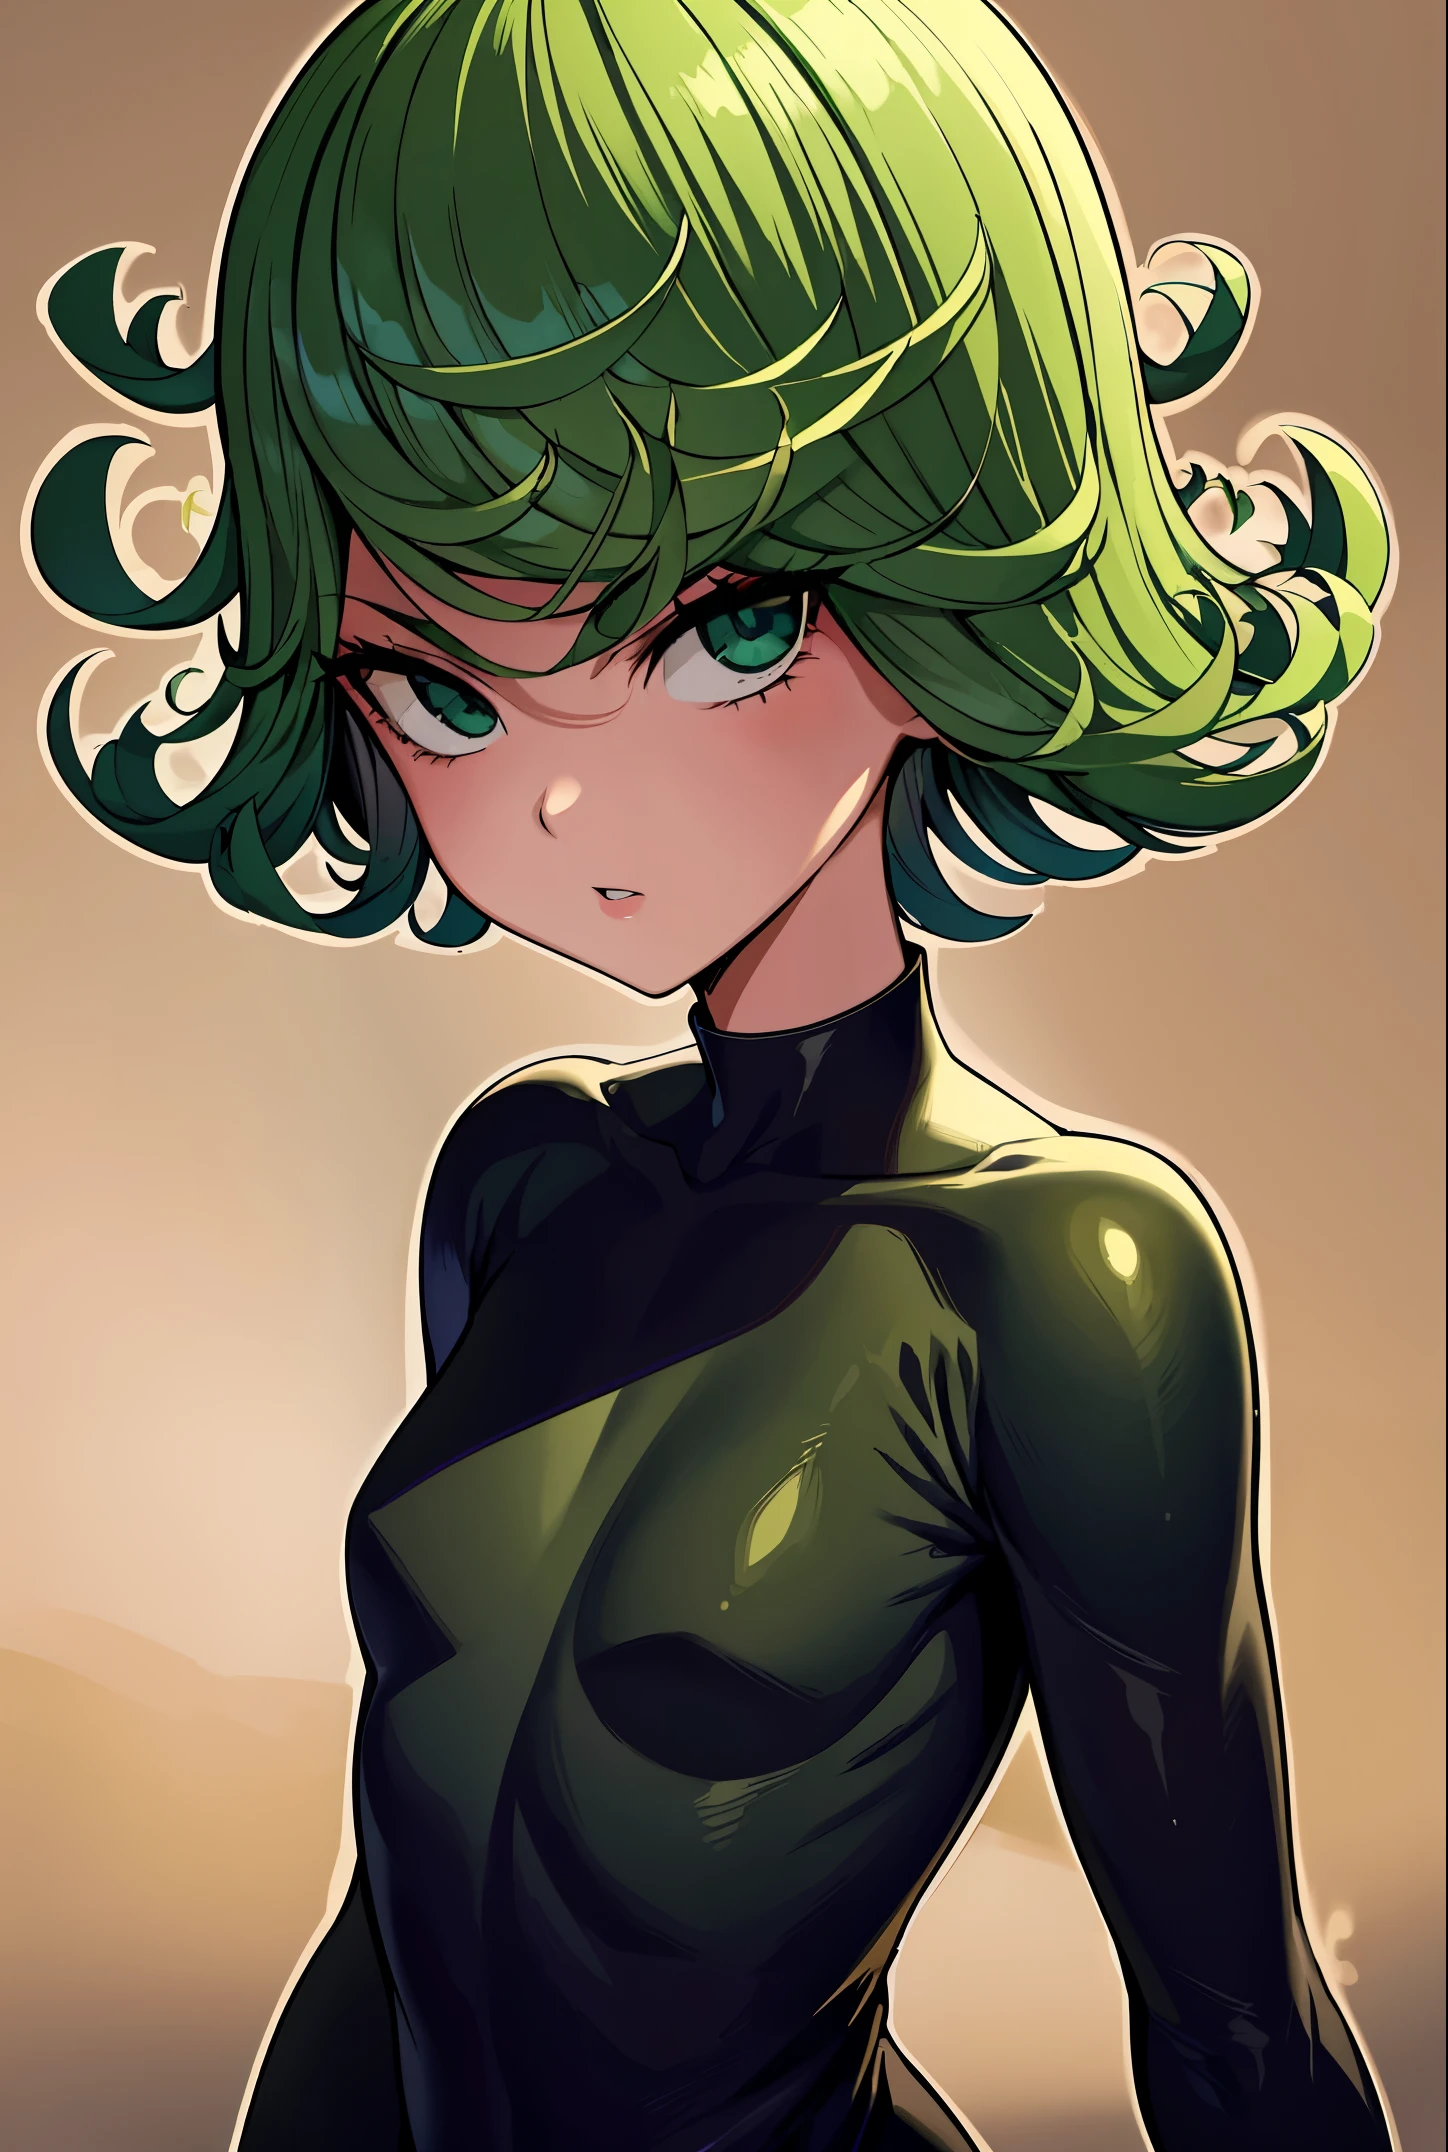 (beste-Qualit, 8K, 12), 1 girl, tatsumaki, Short Hair Hair, green hair, little chest, , the perfect body, ultra detail face, detailed lips, Slender Eyes, gown, stands, enticing, Excited, convex areolas, steam, From Bottom